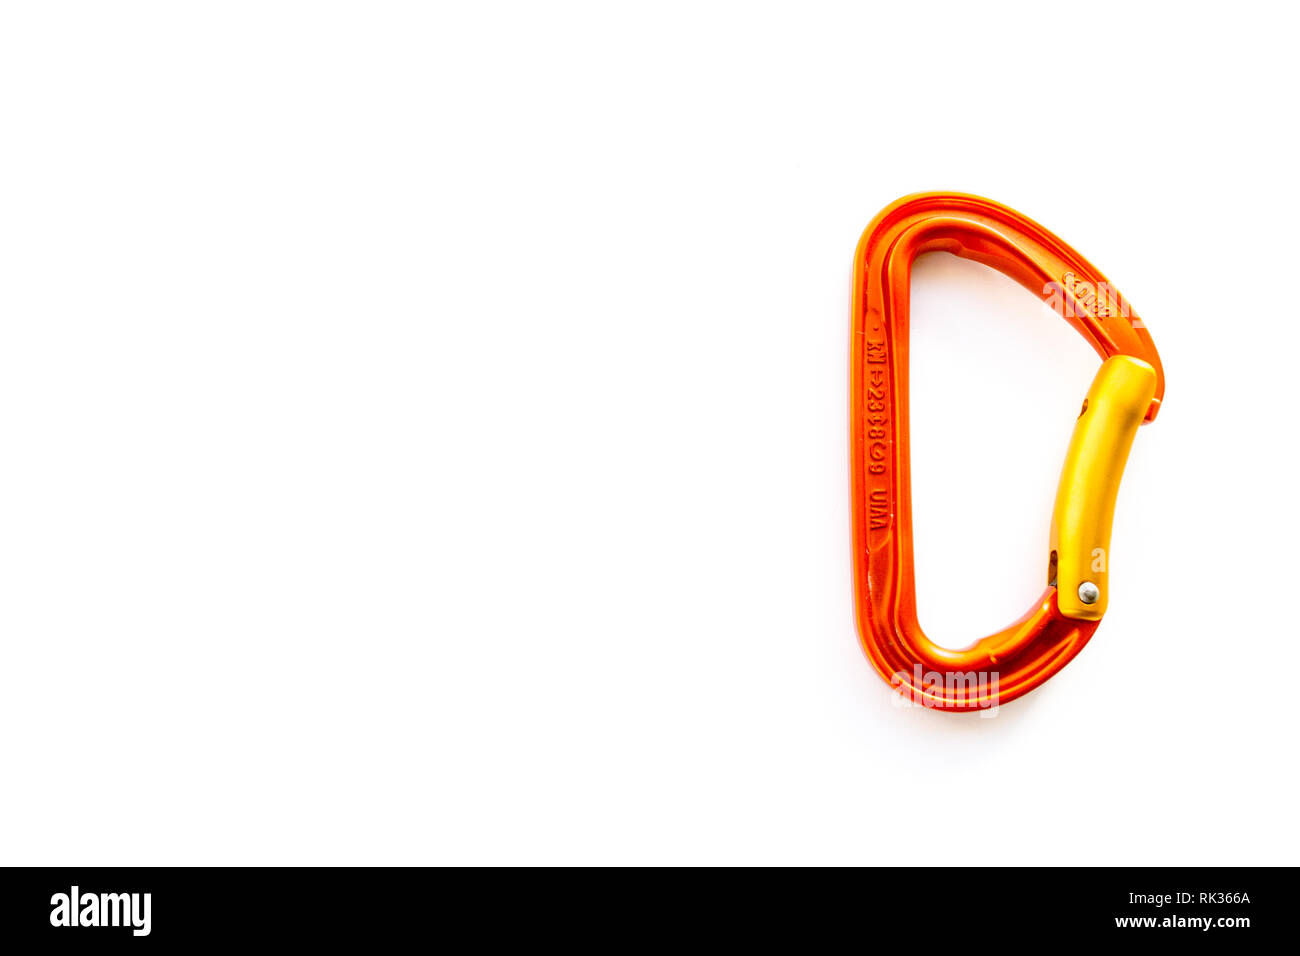 Orange solid bent gate carabiner for rope clipping, isolated on white background, with copy space. Basic climbing gear with axis strength ratings. Stock Photo